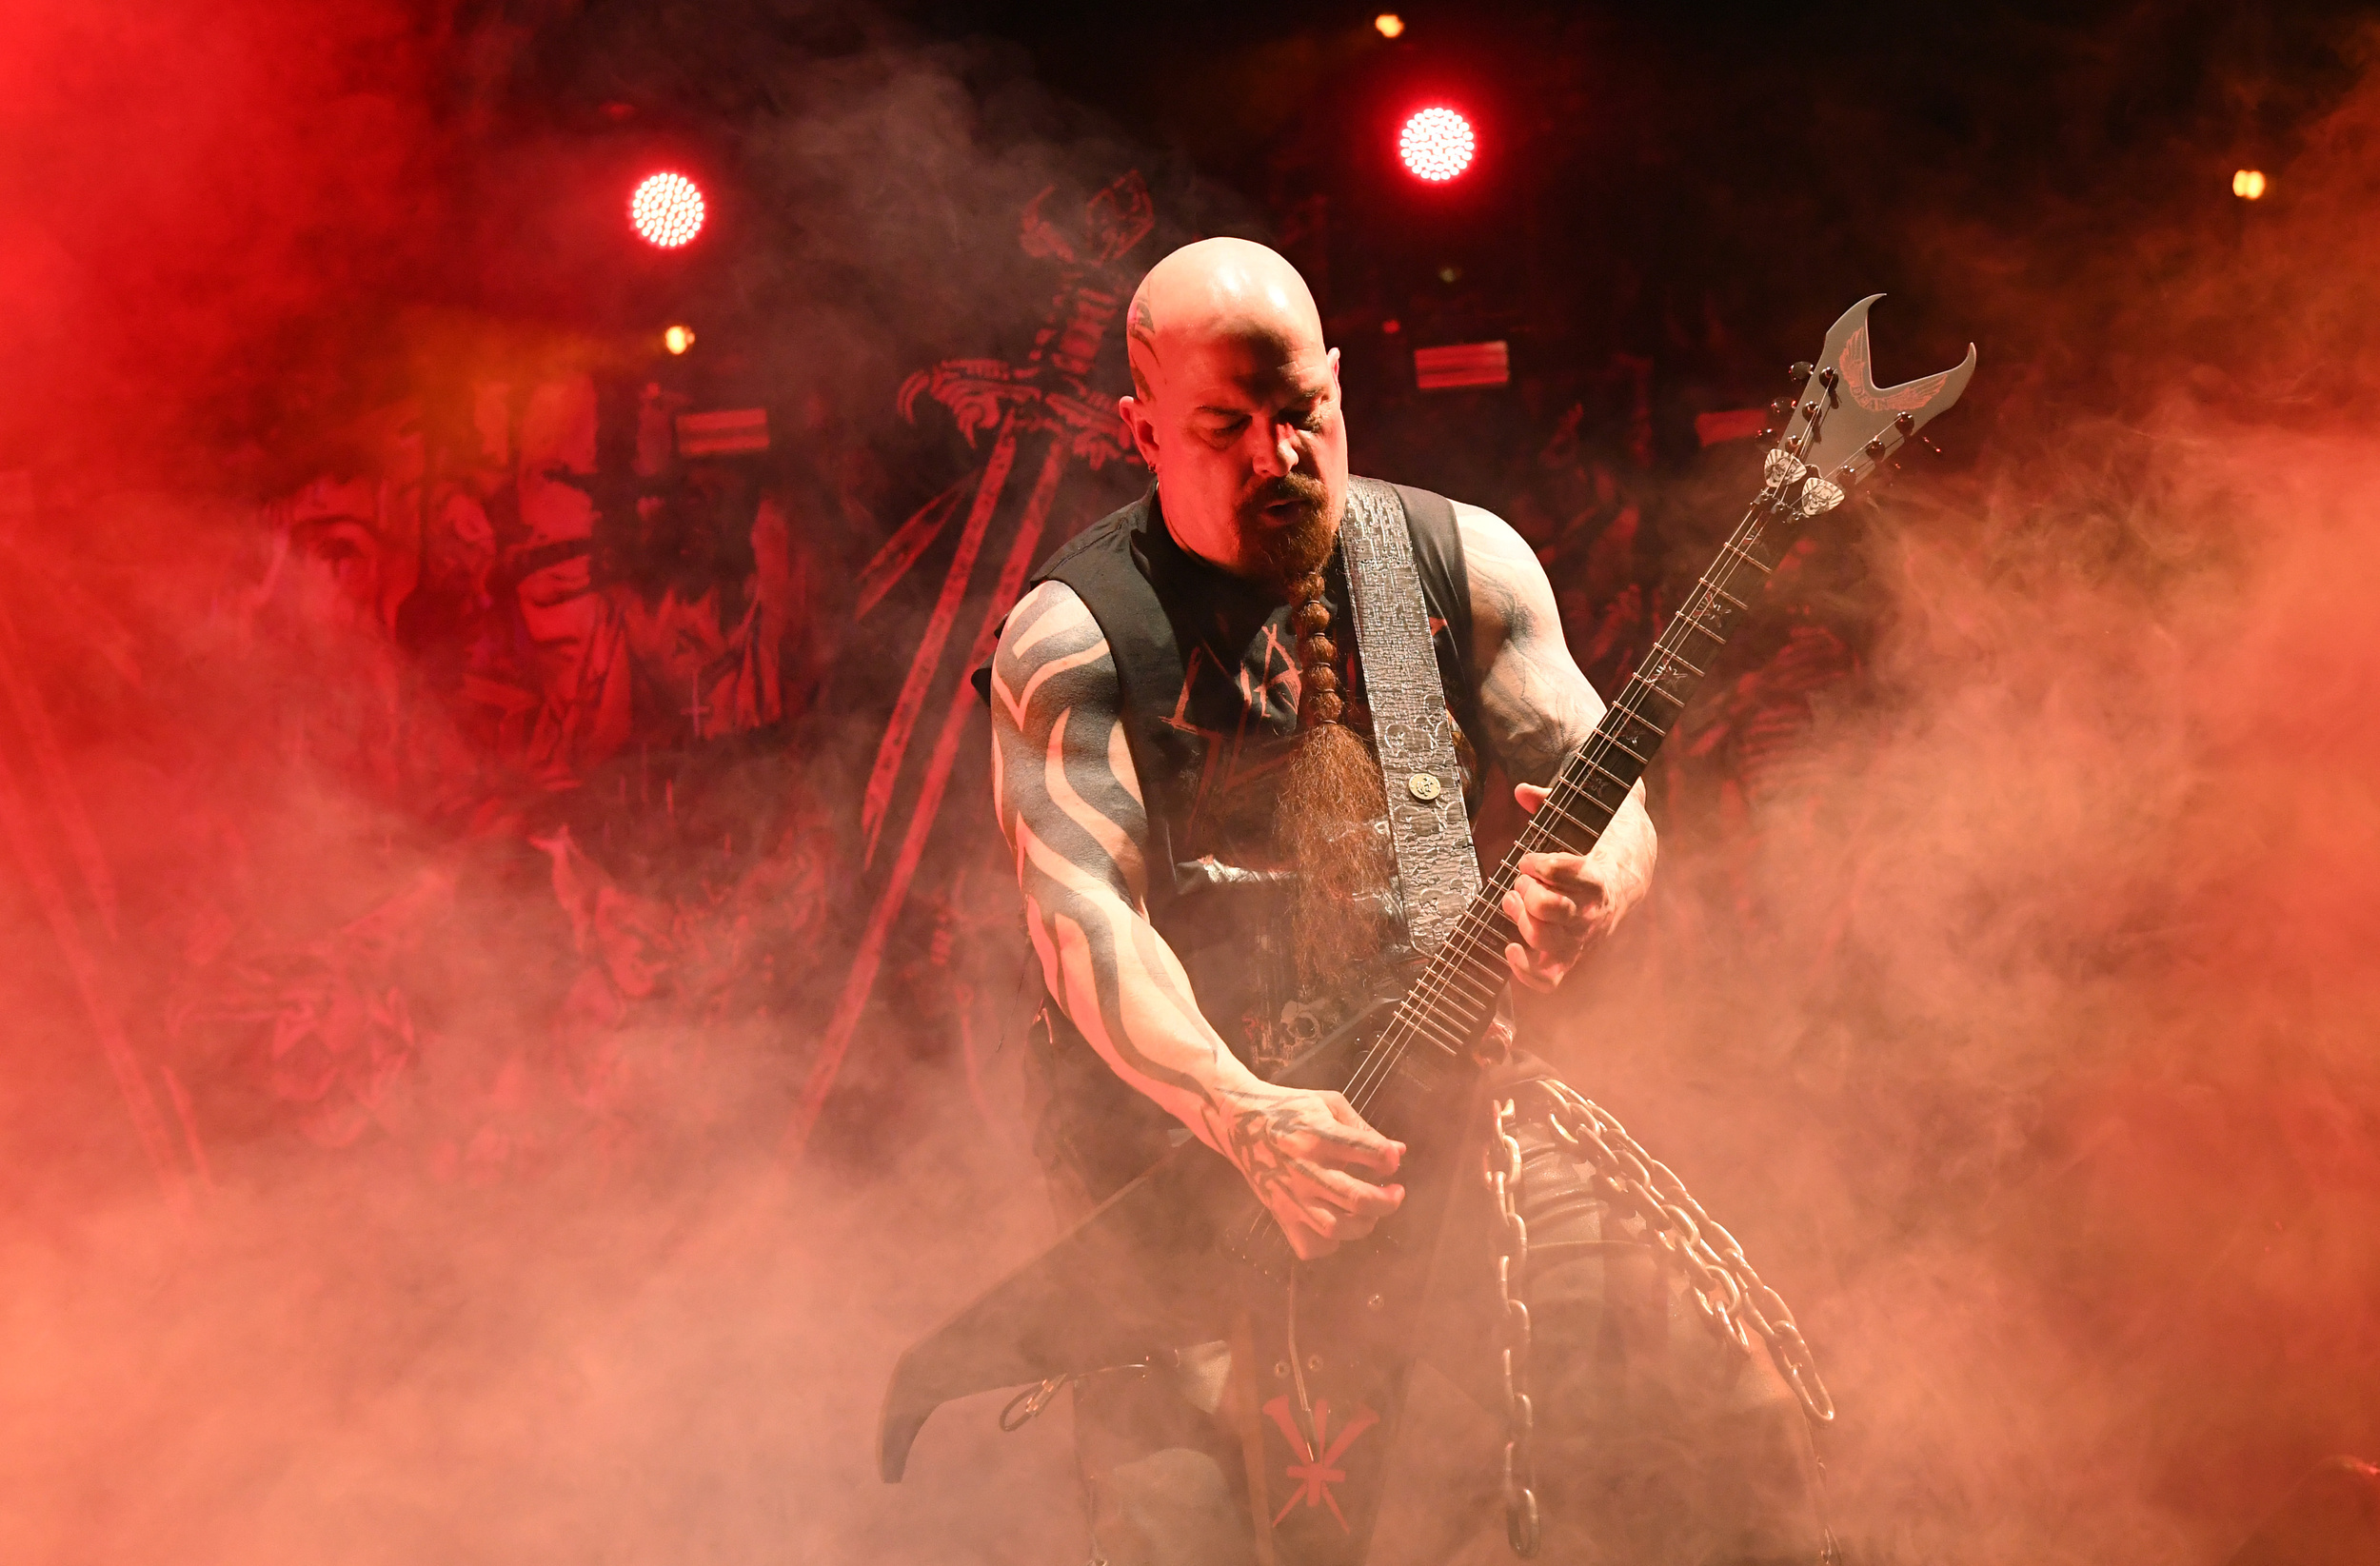 <p>Speaking of Slayer, Kerry King is set to release his debut solo album this year. King has assembled a murderers row of thrash musicians to fill out his lineup, which includes vocalist Mark Osegueda (Death Angel), guitarist Phil Demmel (Vio-Lence, Machine Head), bassist Kyle Sanders (Hellyeah), and Paul Bostaph (Slayer, Testament, Exodus). The lead single, "Idle Hands", sounds like... you guessed it, Slayer. There was an announcement about a Slayer reunion mere days after the debut of "Idle Hands", which the famously outspoken King claims to have no knowledge of. While we're waiting to find out, we'll have this record to cozy up to.</p><p><a href='https://www.msn.com/en-us/community/channel/vid-cj9pqbr0vn9in2b6ddcd8sfgpfq6x6utp44fssrv6mc2gtybw0us'>Follow us on MSN to see more of our exclusive entertainment content.</a></p>